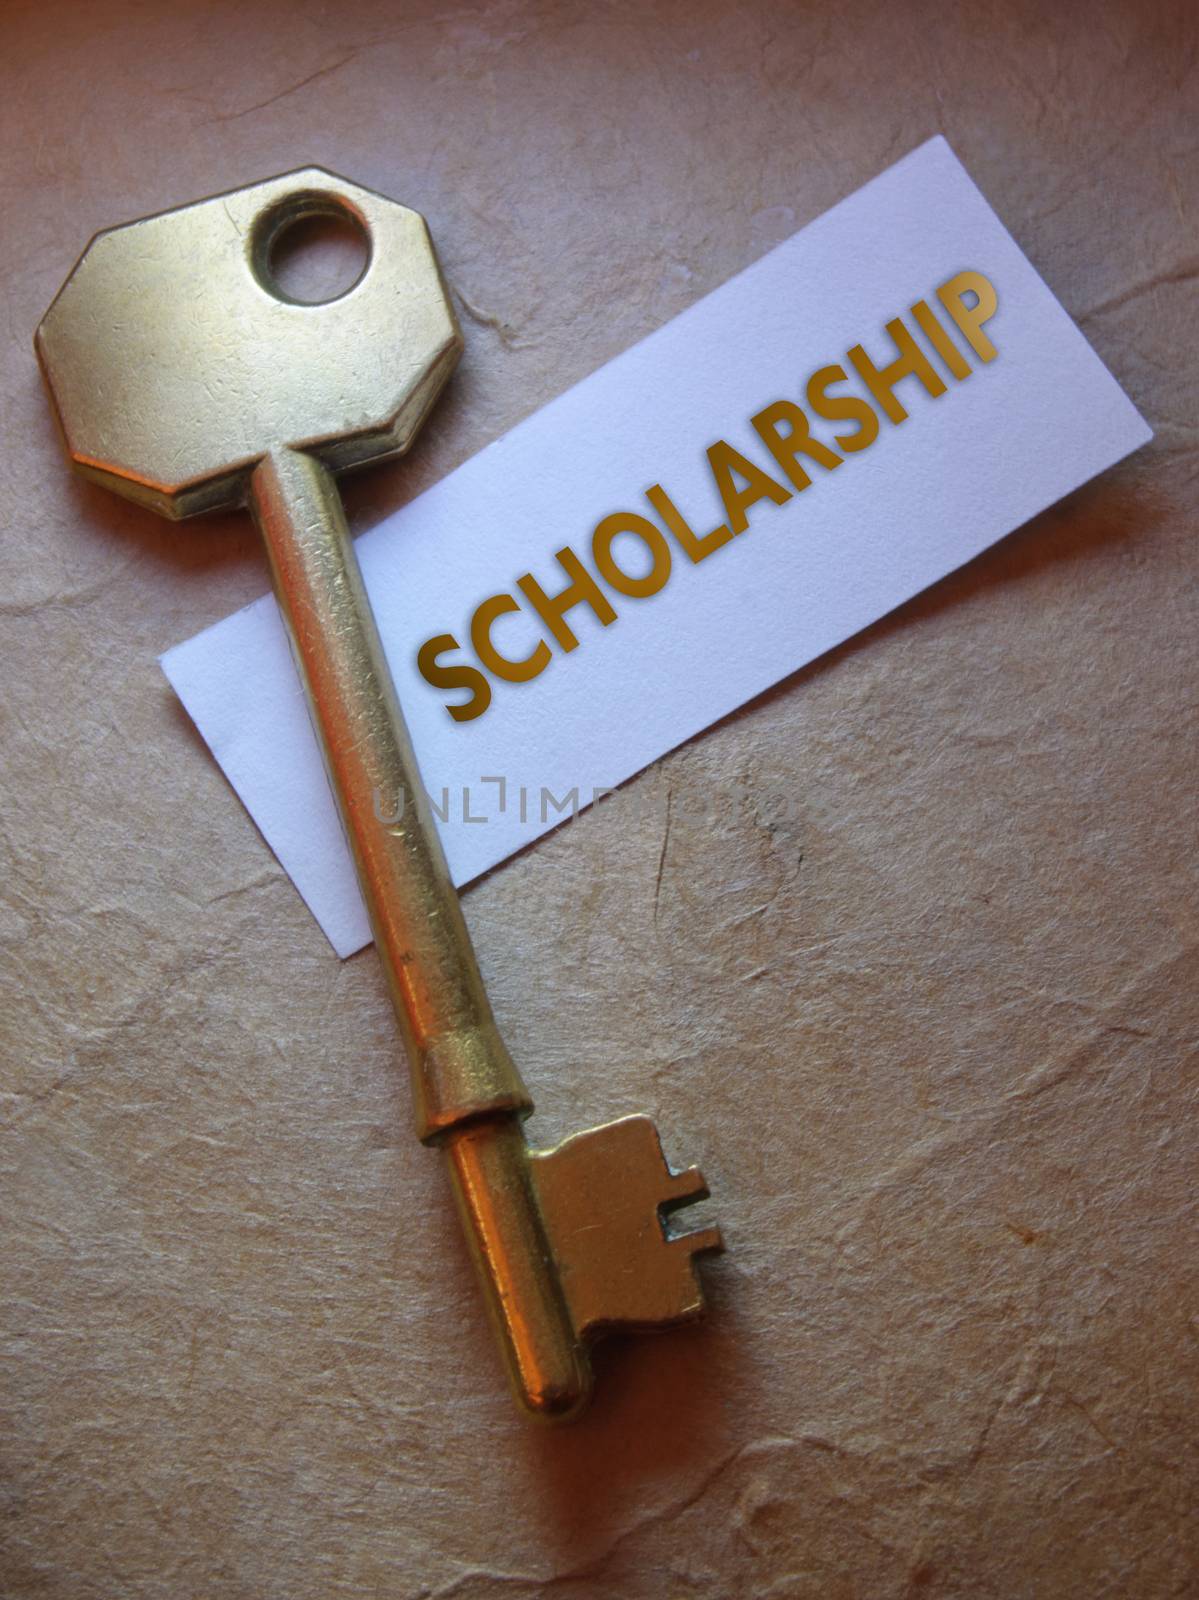 Scholarship label and golden key close up